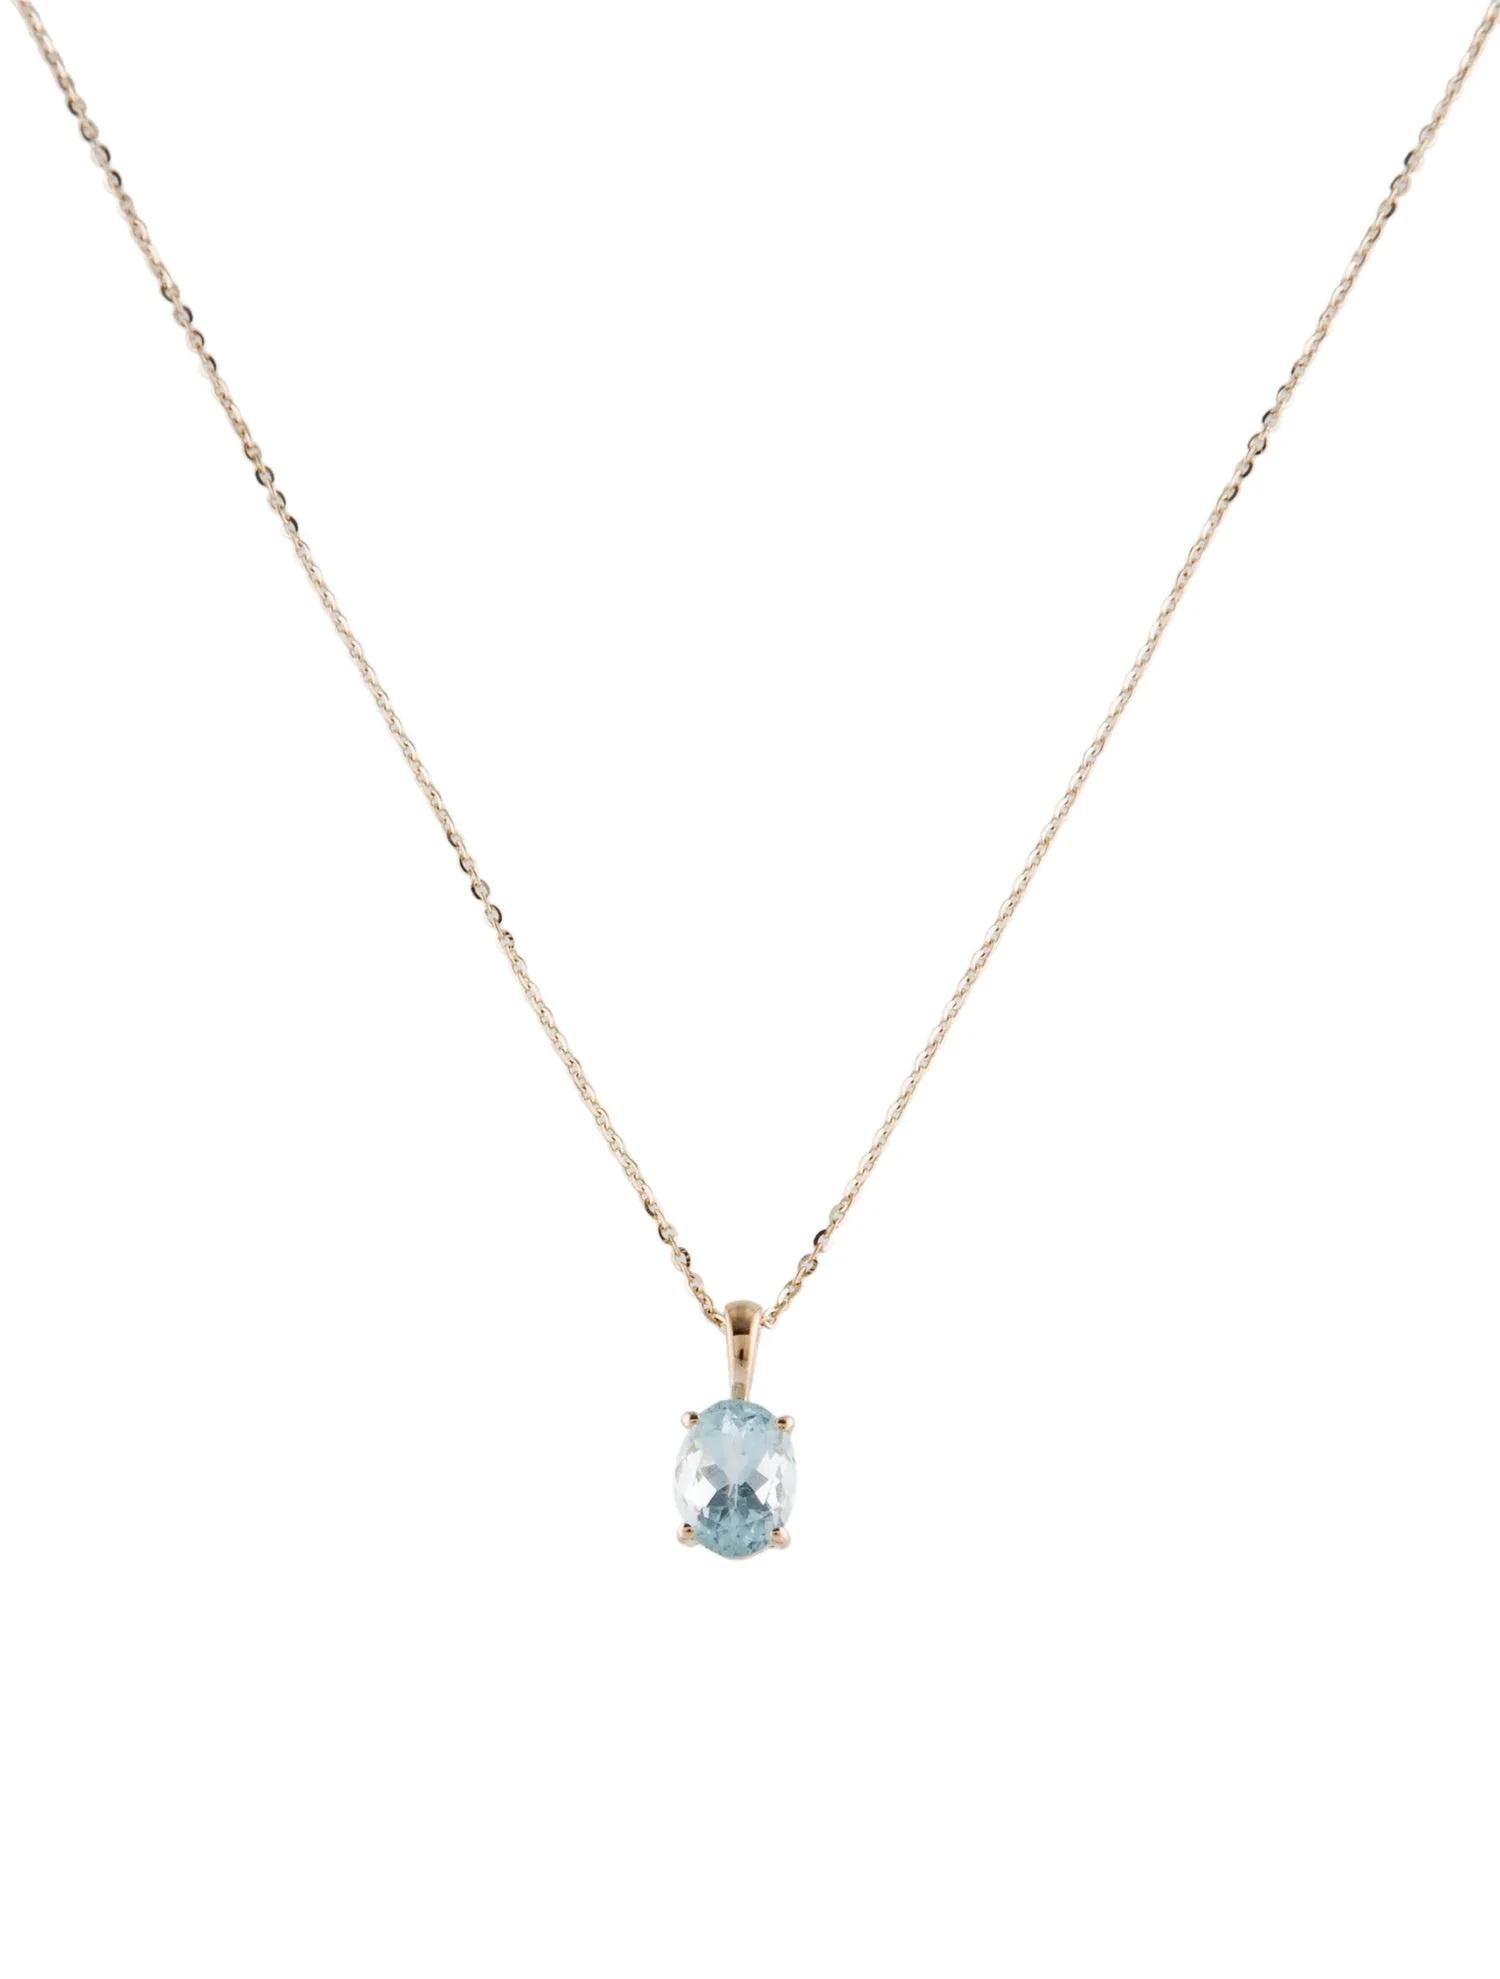 Elevate your jewelry collection with our stunning 14K Yellow Gold Aquamarine Pendant Necklace. This exquisite piece features a beautifully crafted oval modified brilliant aquamarine, set in the finest 14K yellow gold. The pendant's serene blue hue